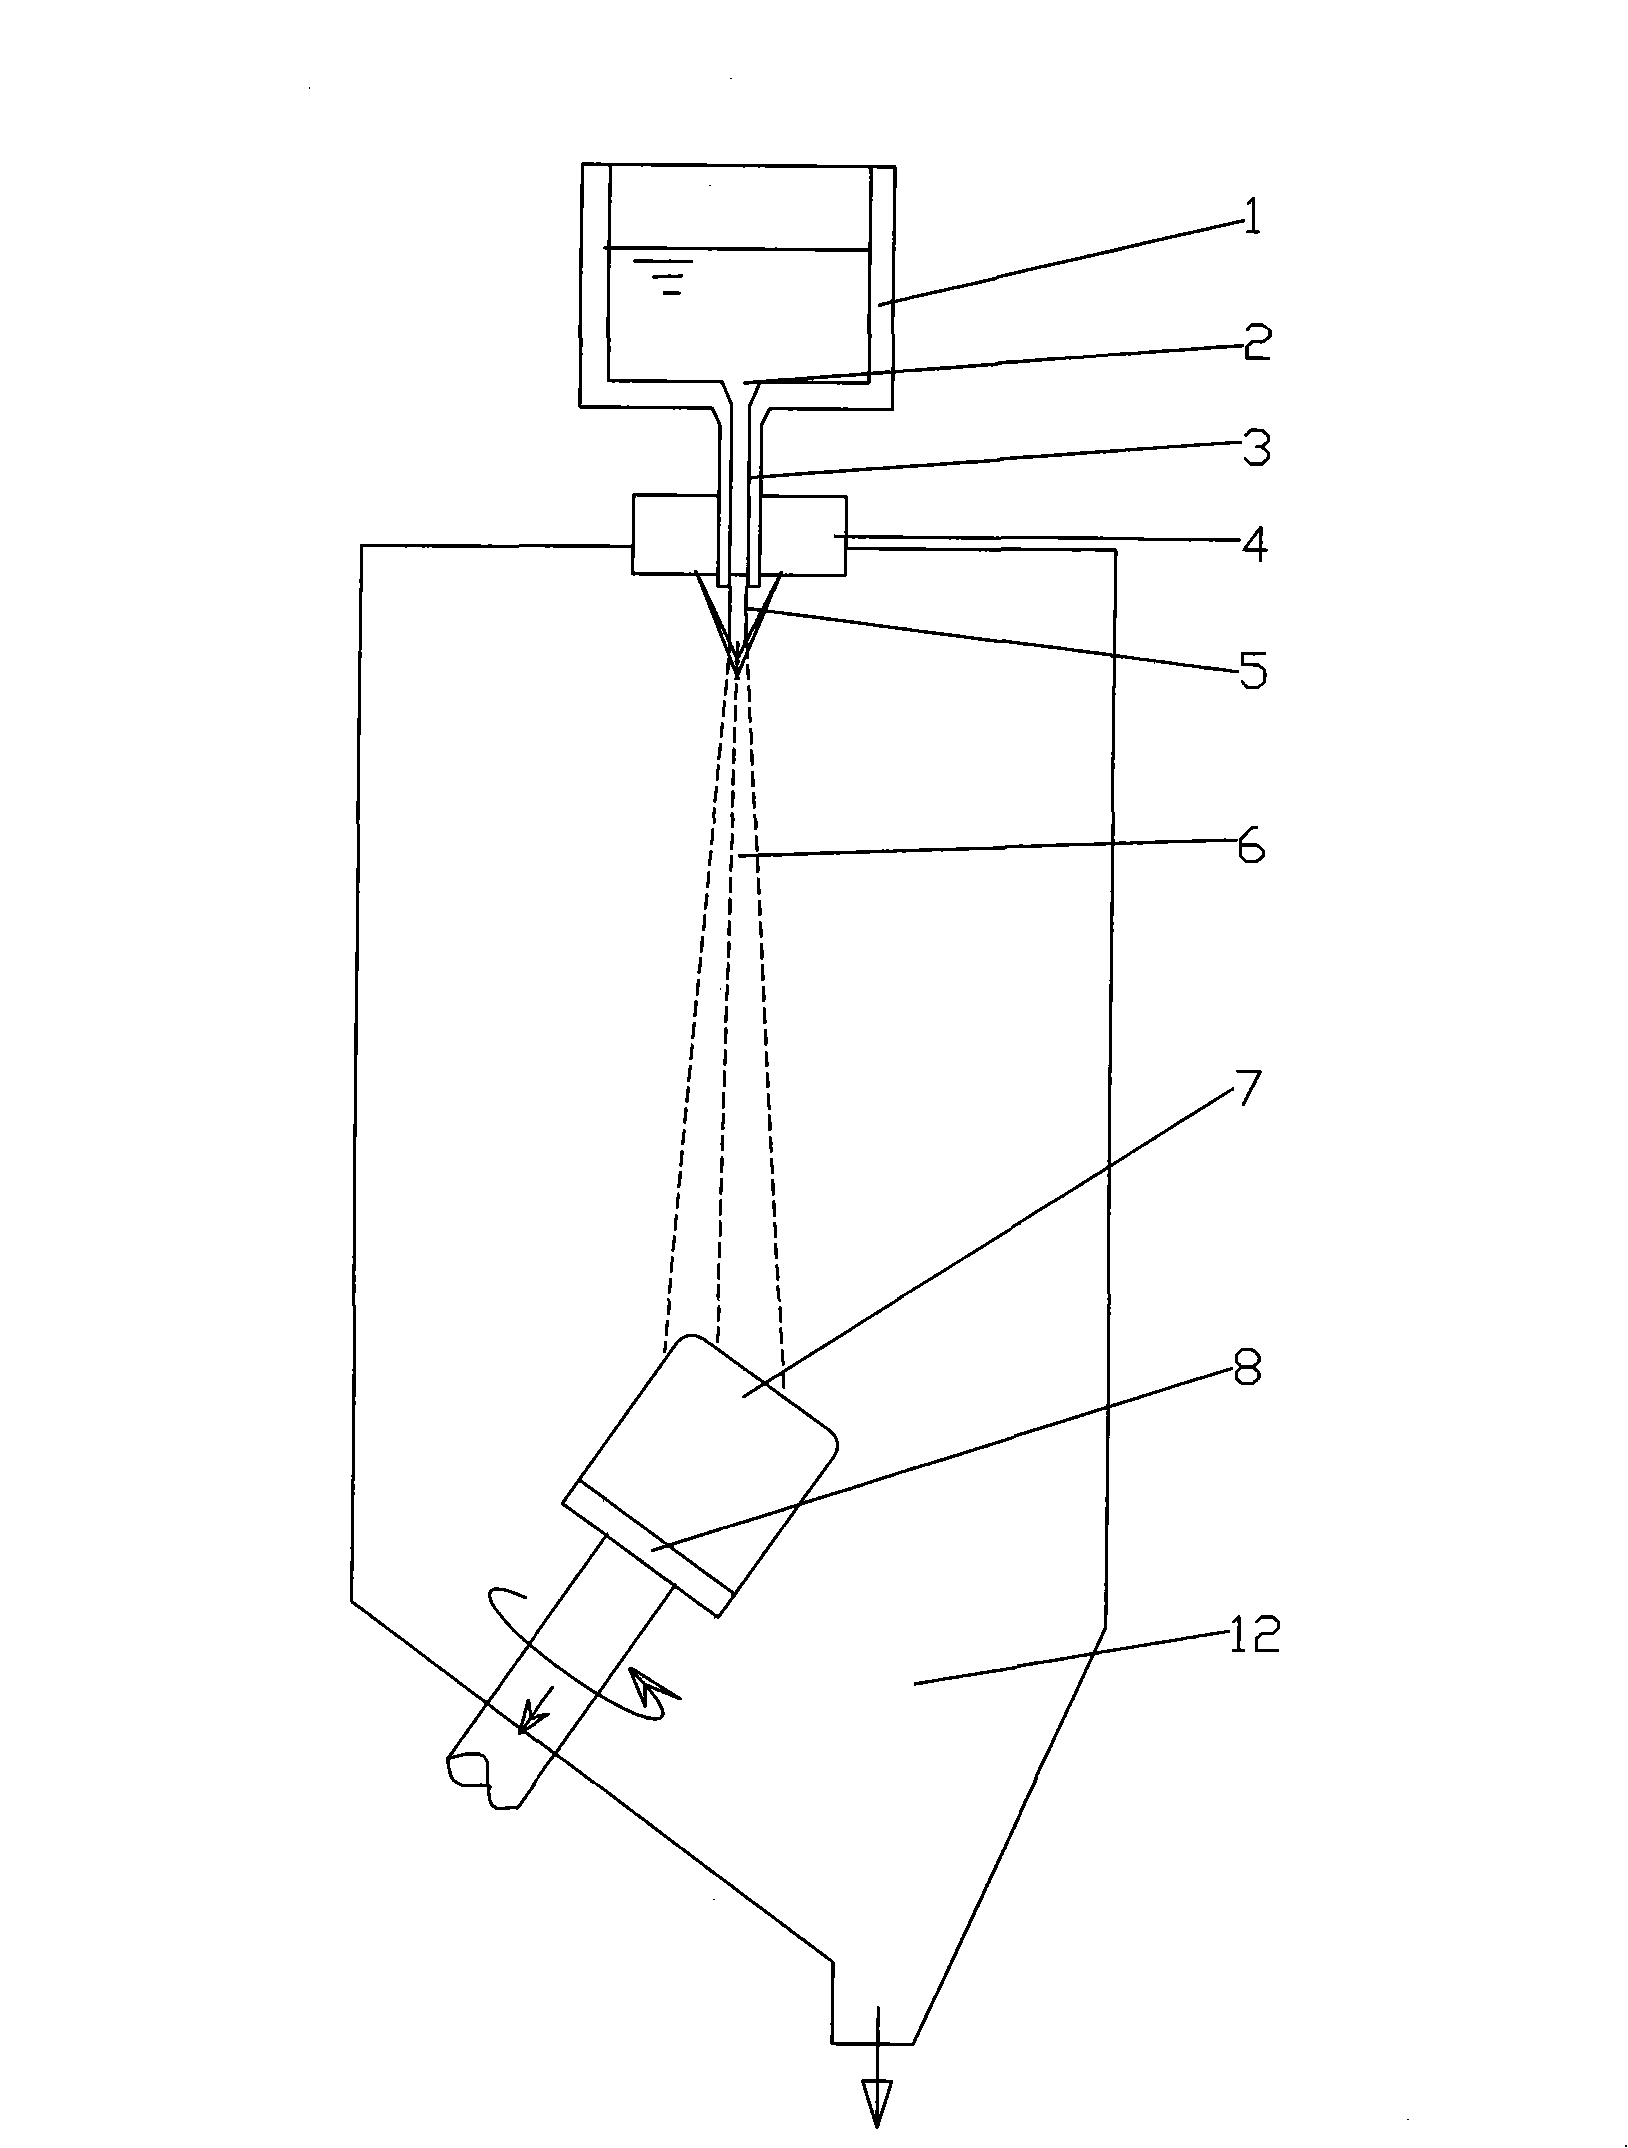 Continuous production technique of spray forming ingot